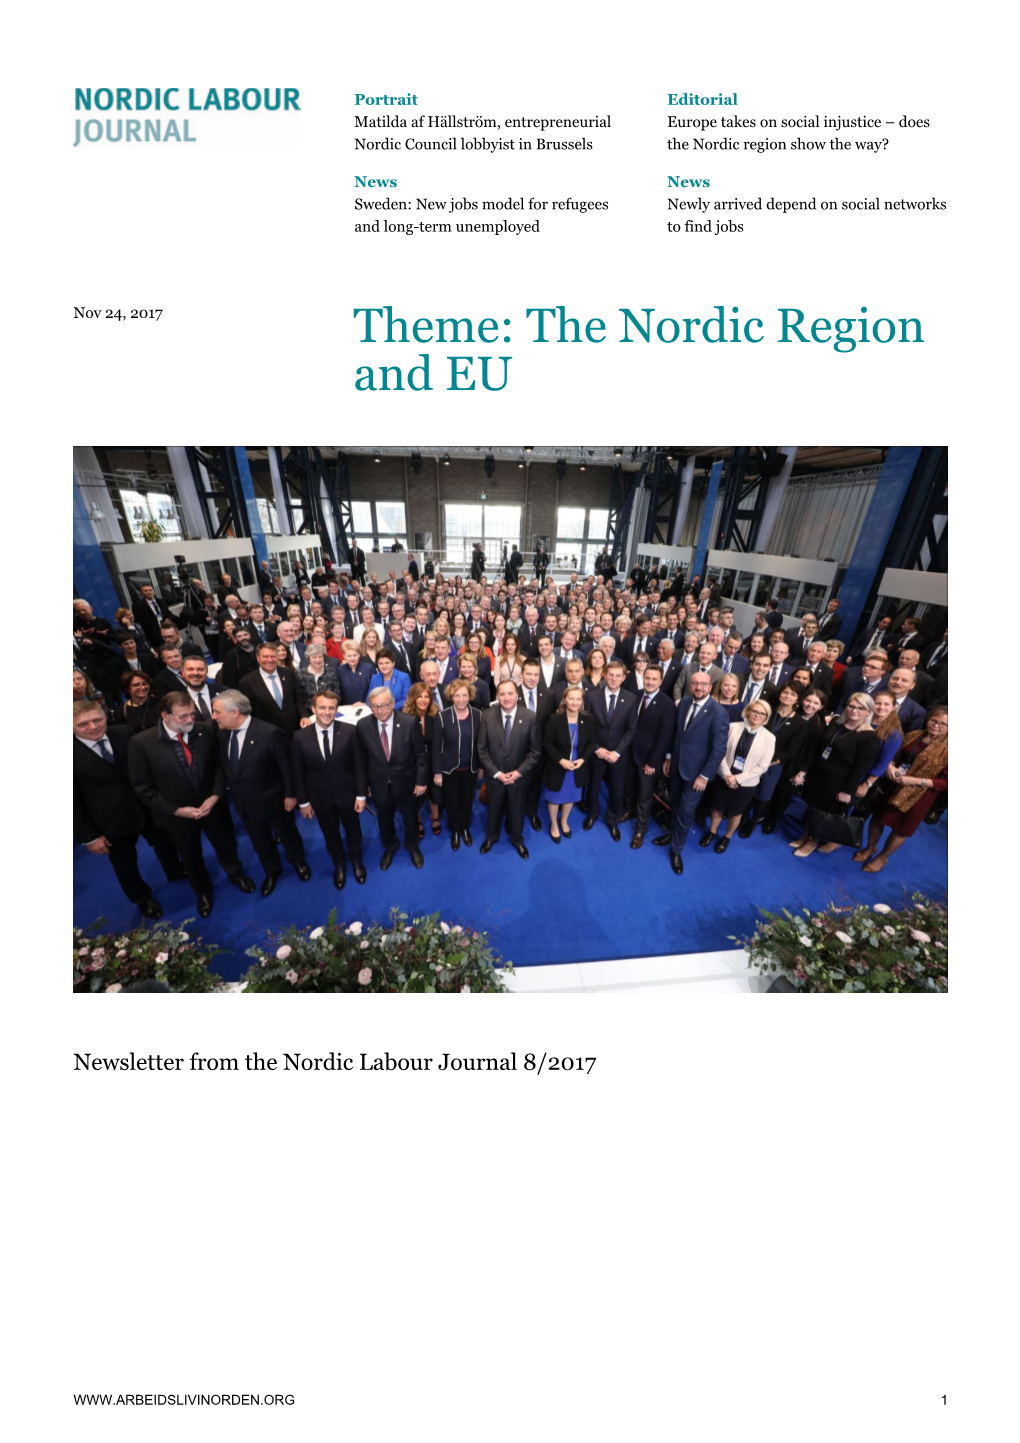 The Nordic Region and EU